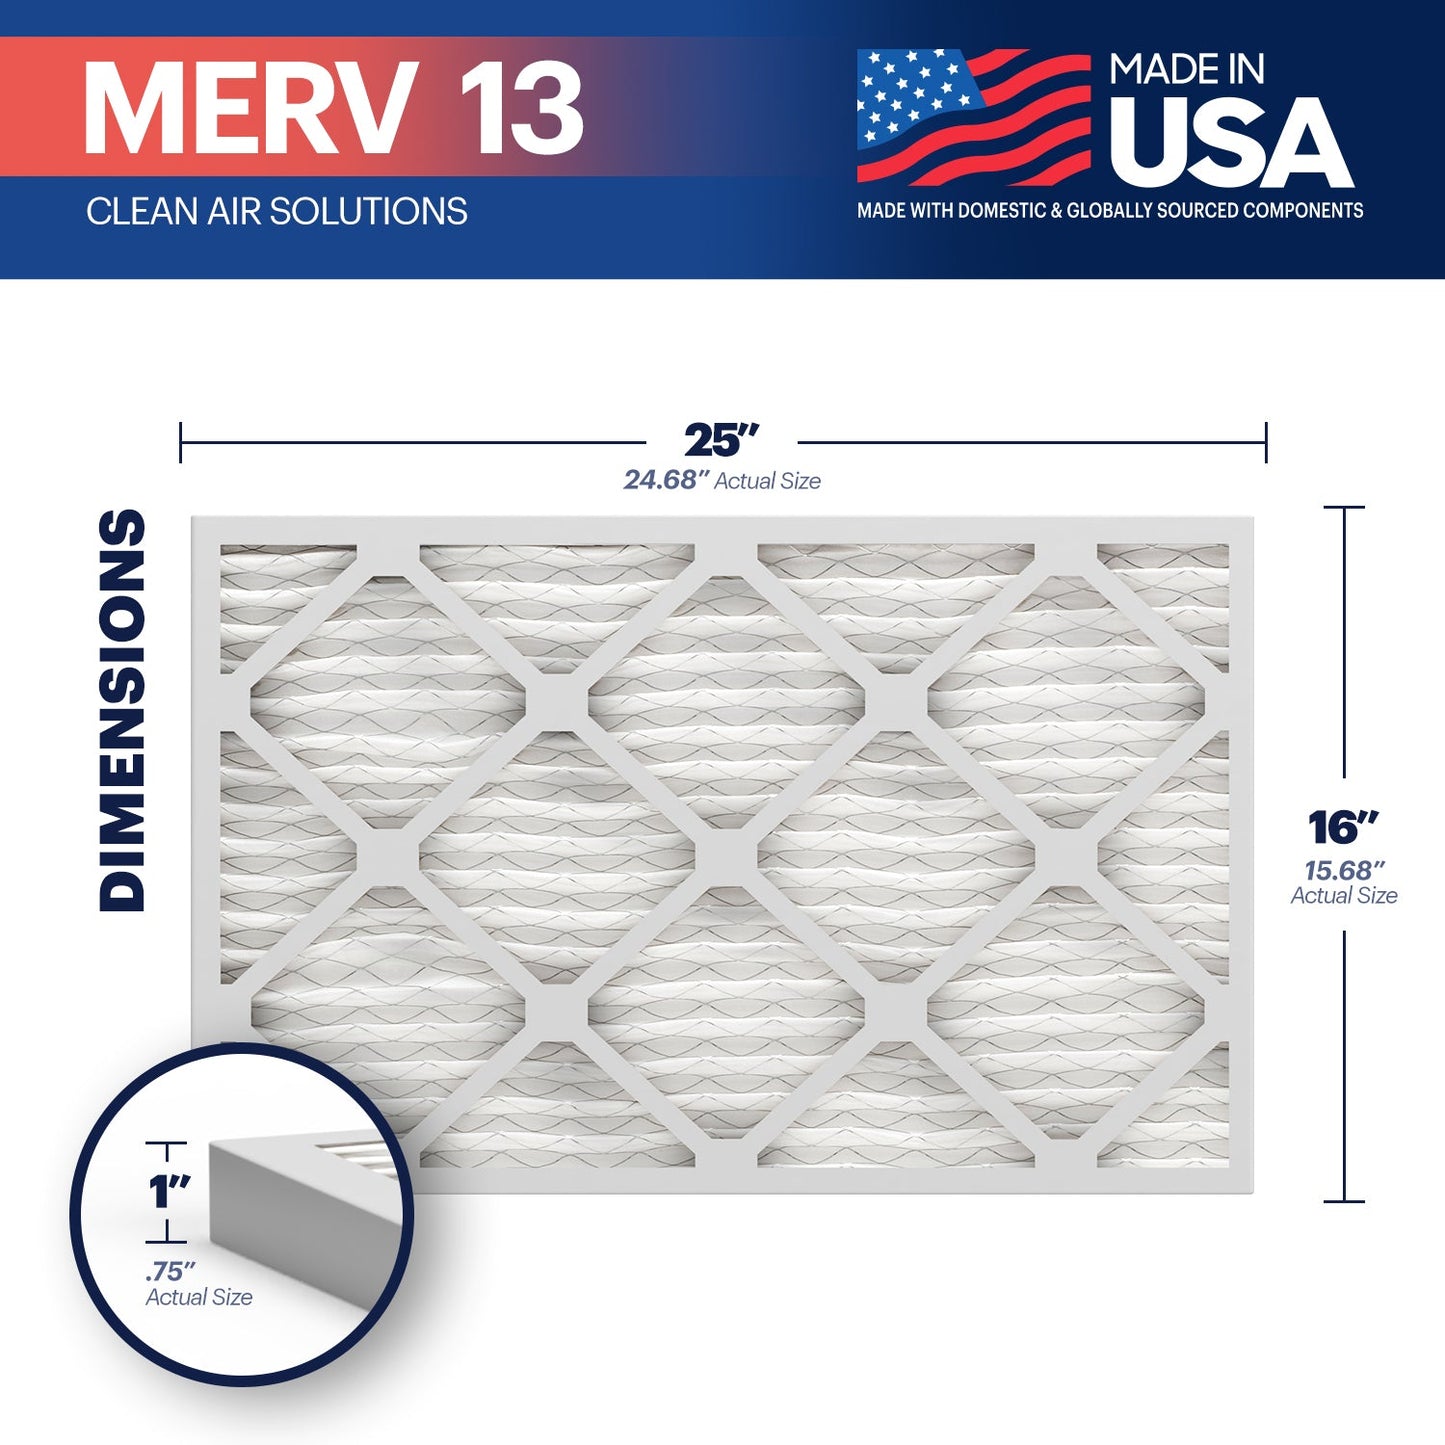 BNX TruFilter 16x25x1 MERV 13 Pleated Air Filter – Made in USA (6-Pack)